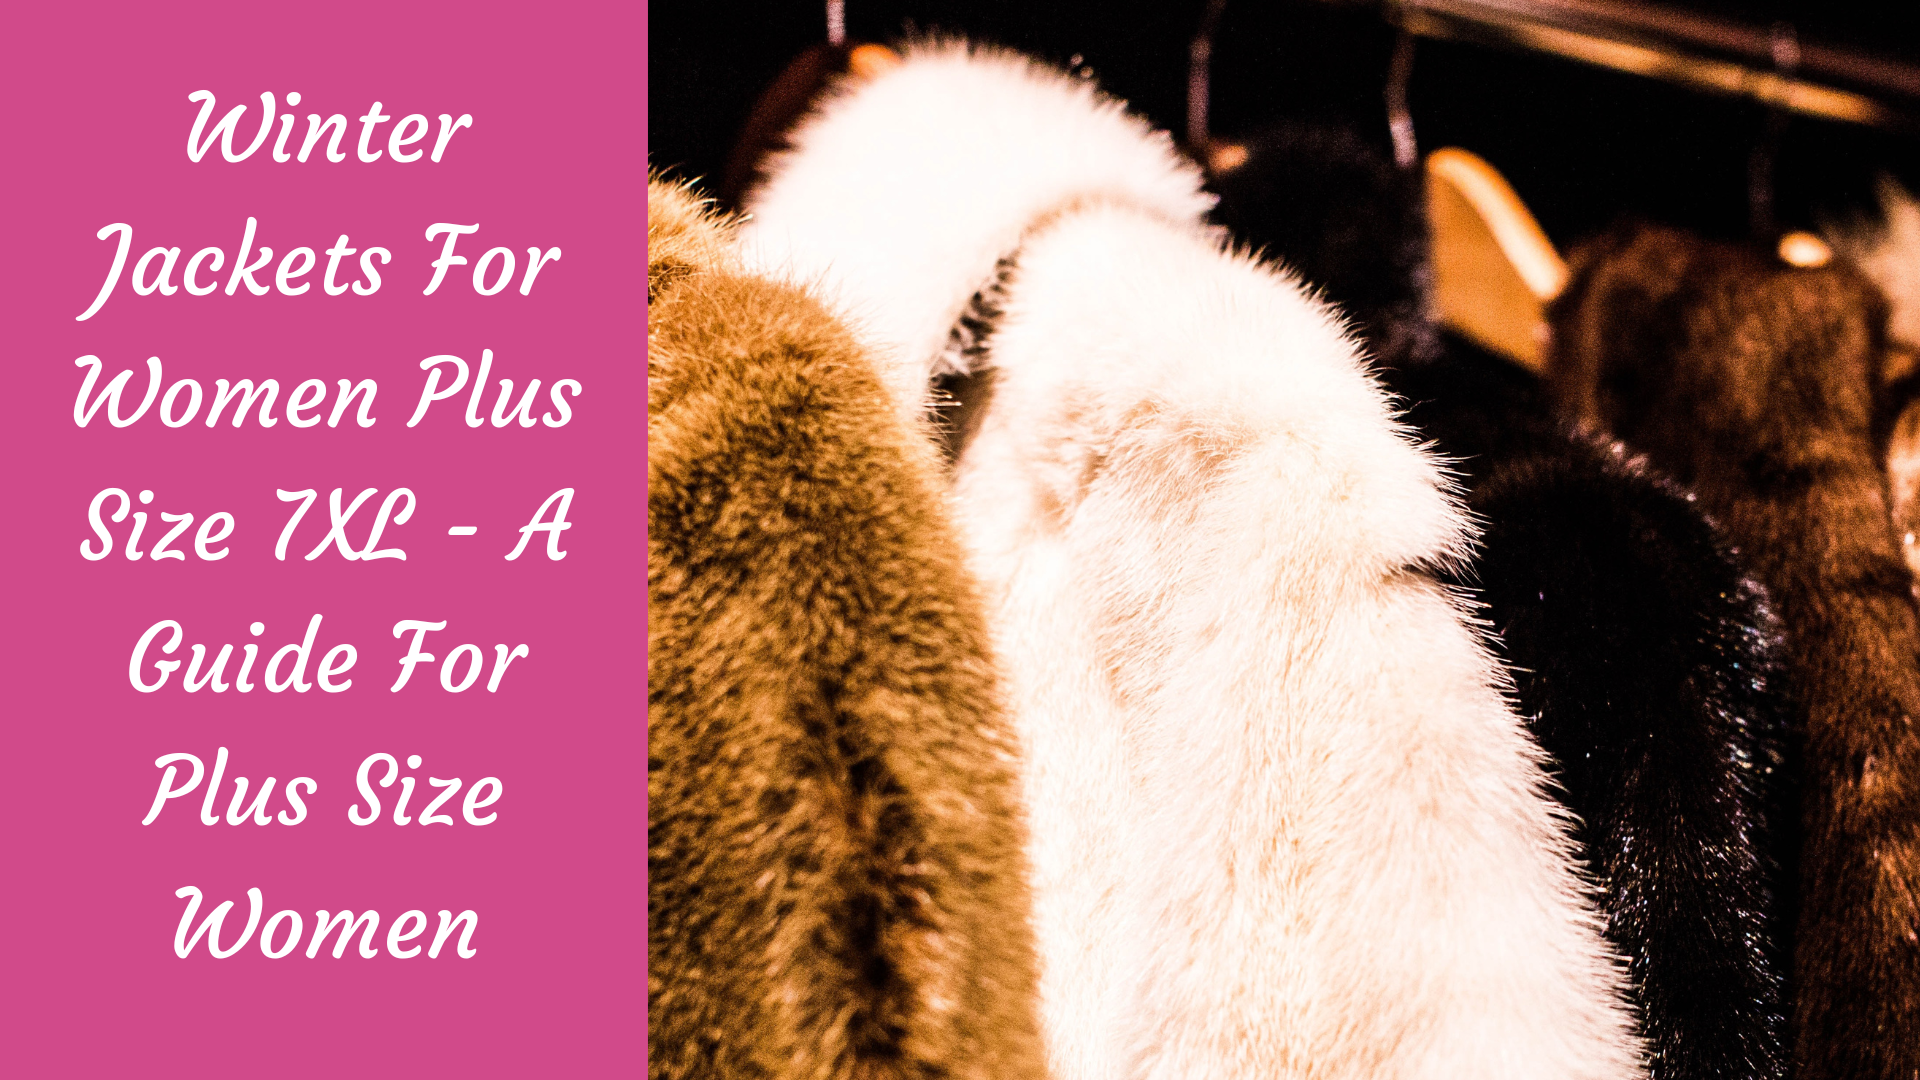 Winter Jackets for women plus size 7XL - A Guide For Plus Size